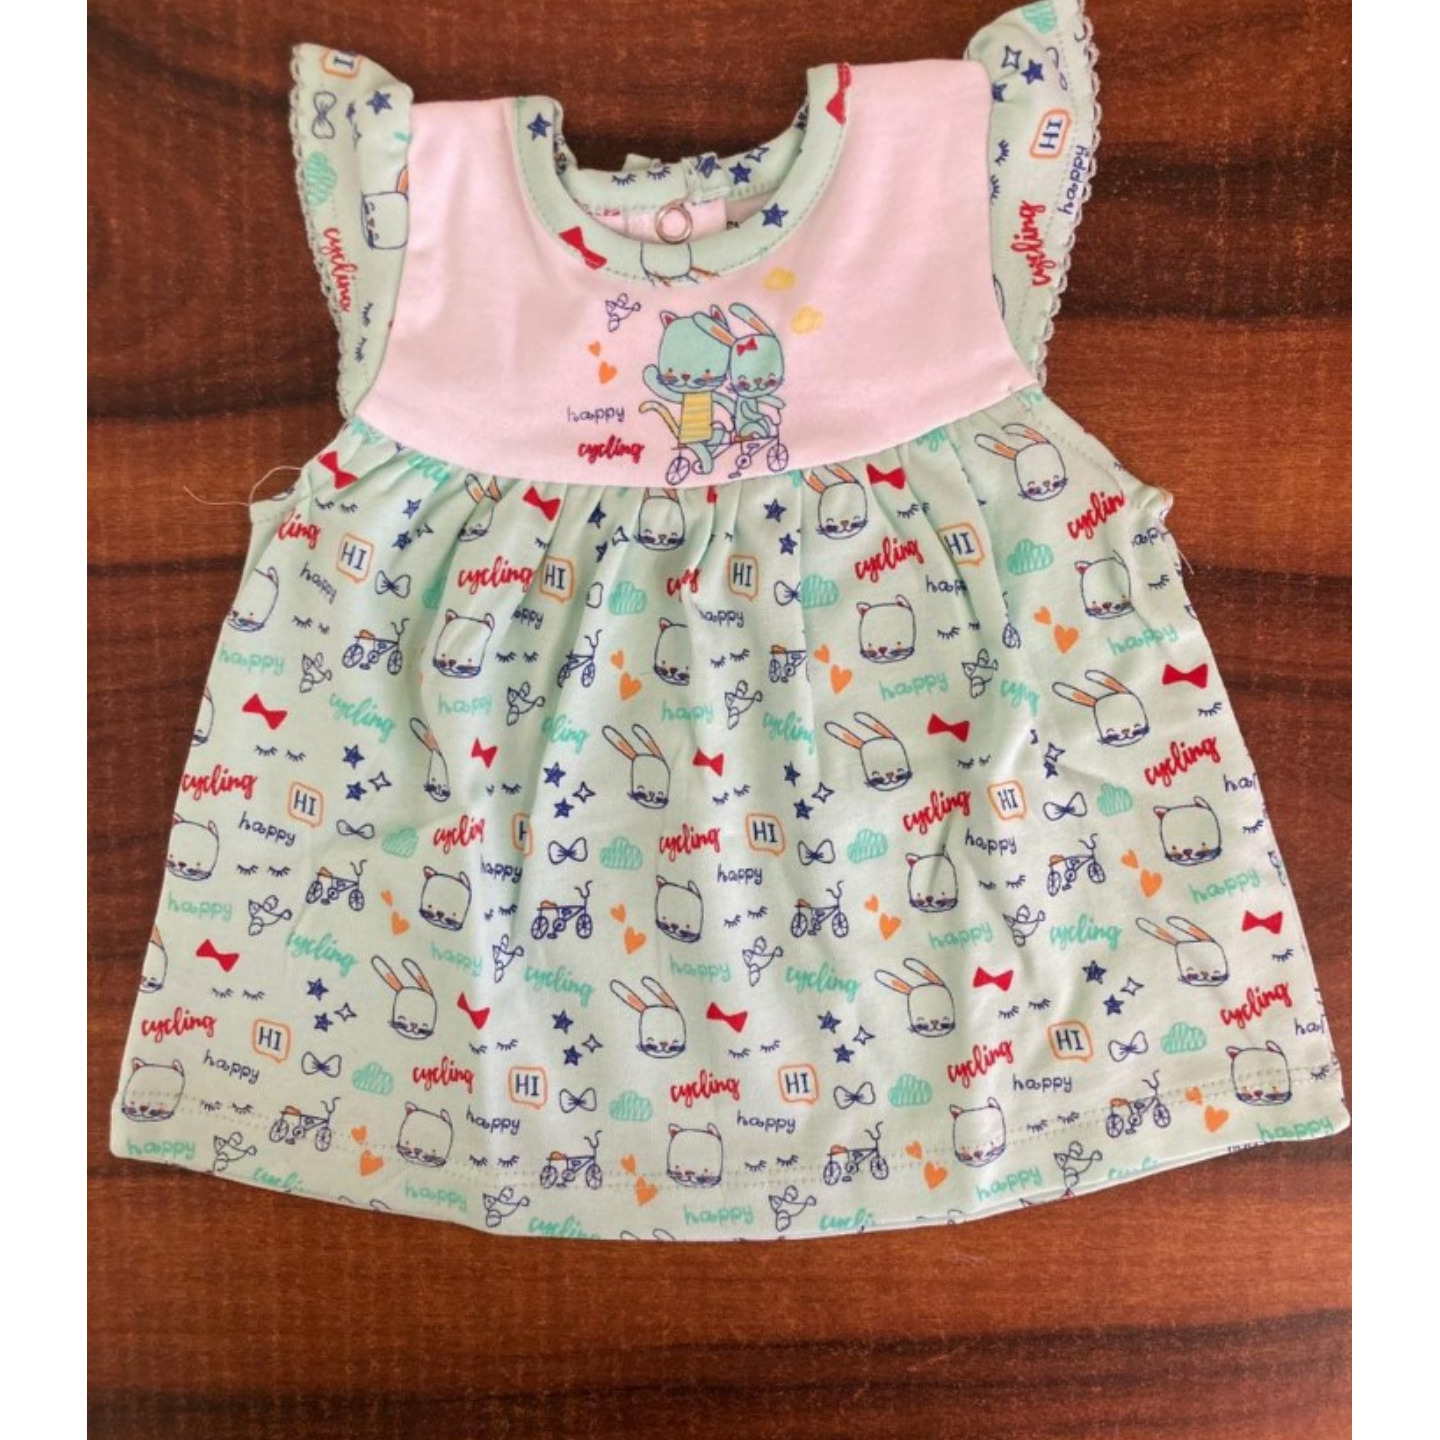 Cucumber Frock Rs 230 Only Made in India 0 to 12 Months